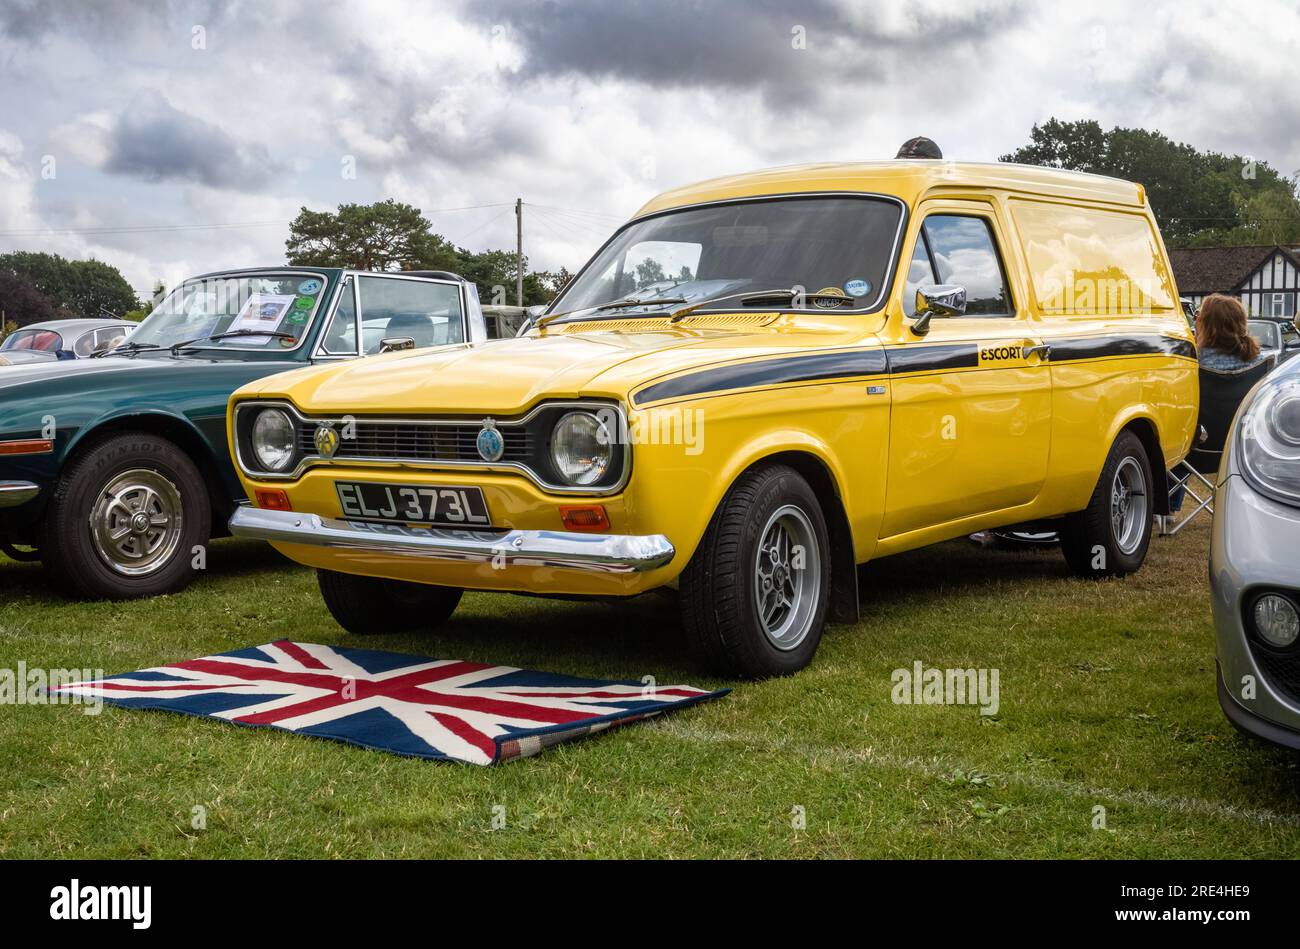 A rare 1973 bright yellow vintage Ford Escort Mk1 van on display at a classic car show in Storrington, West Sussex, UK. Stock Photo